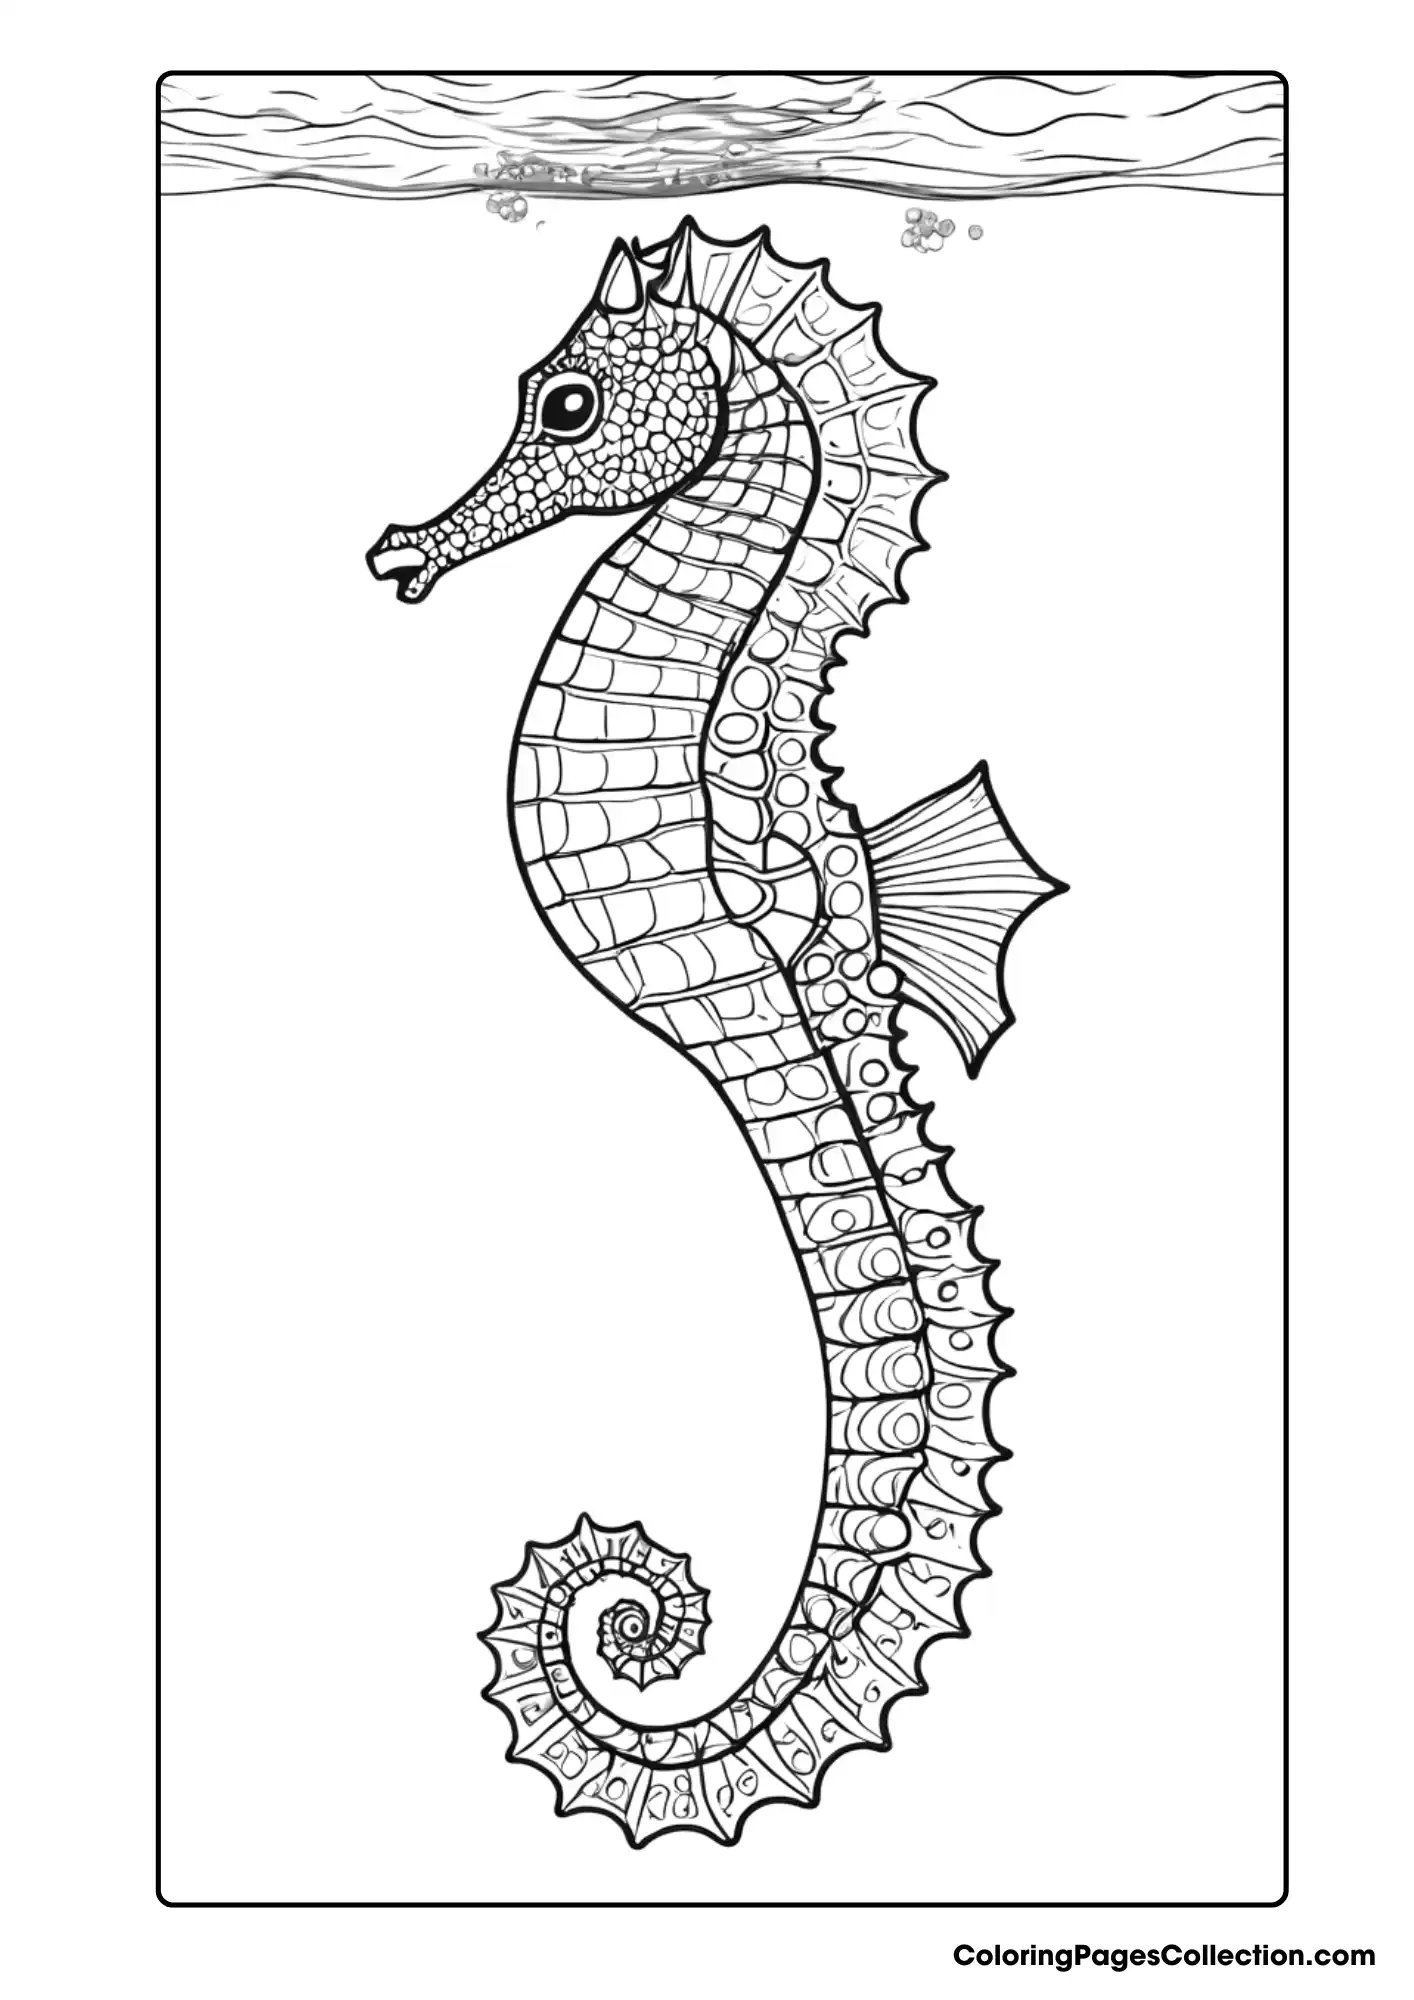 Coloring pages for teens, Seahorse